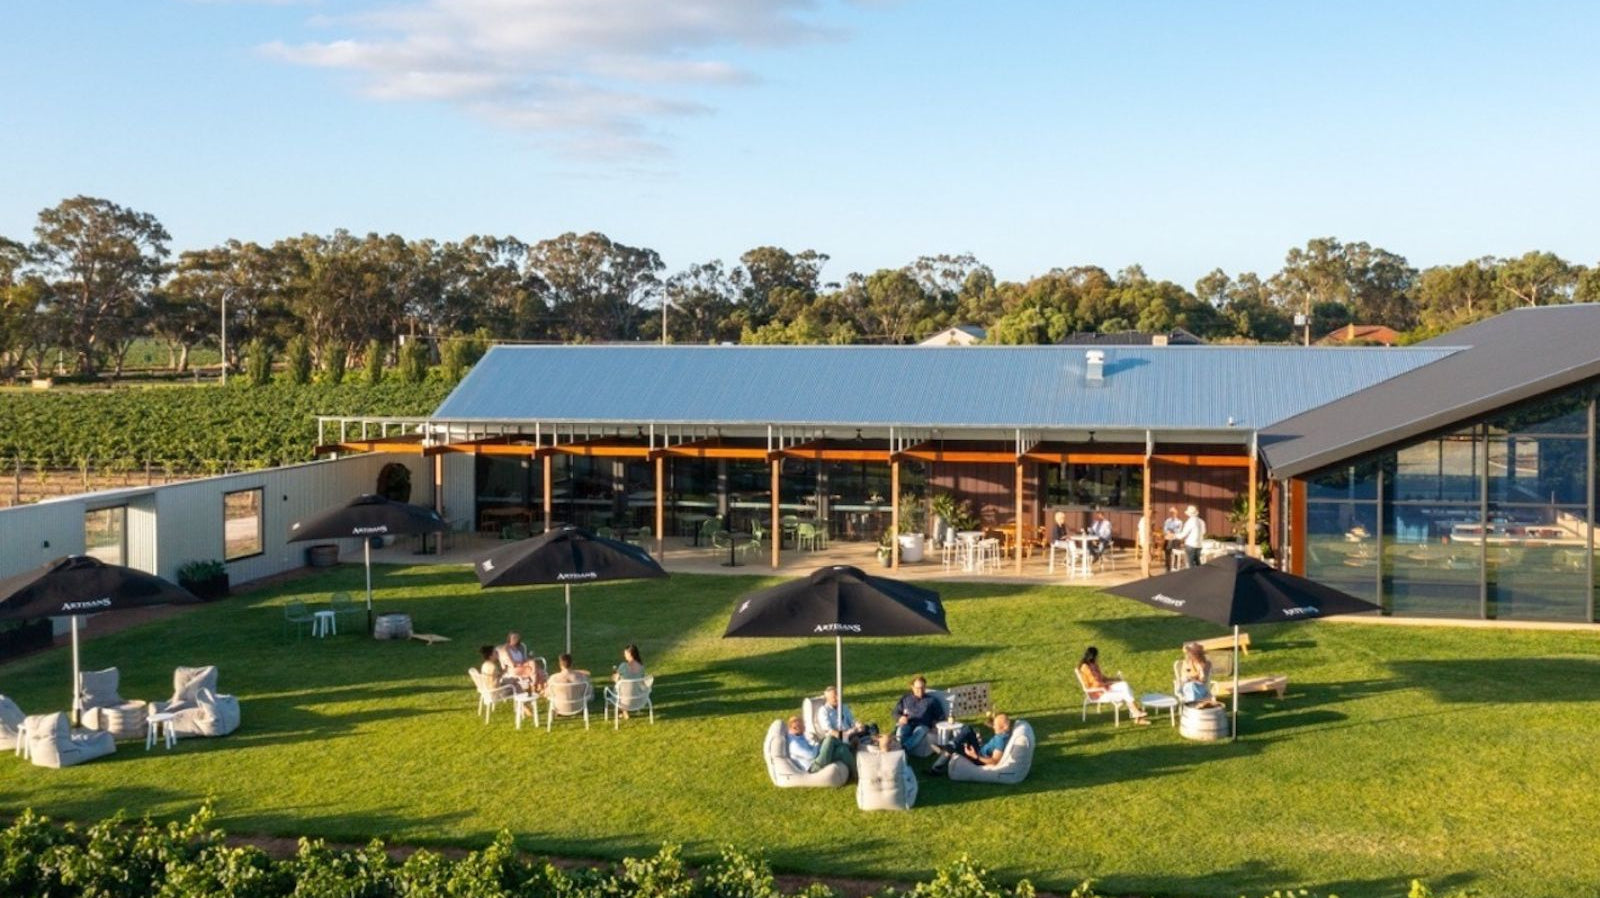 A World-Class Neighbour: Adelaide Residents Luxury Getaway to the Barossa Valley